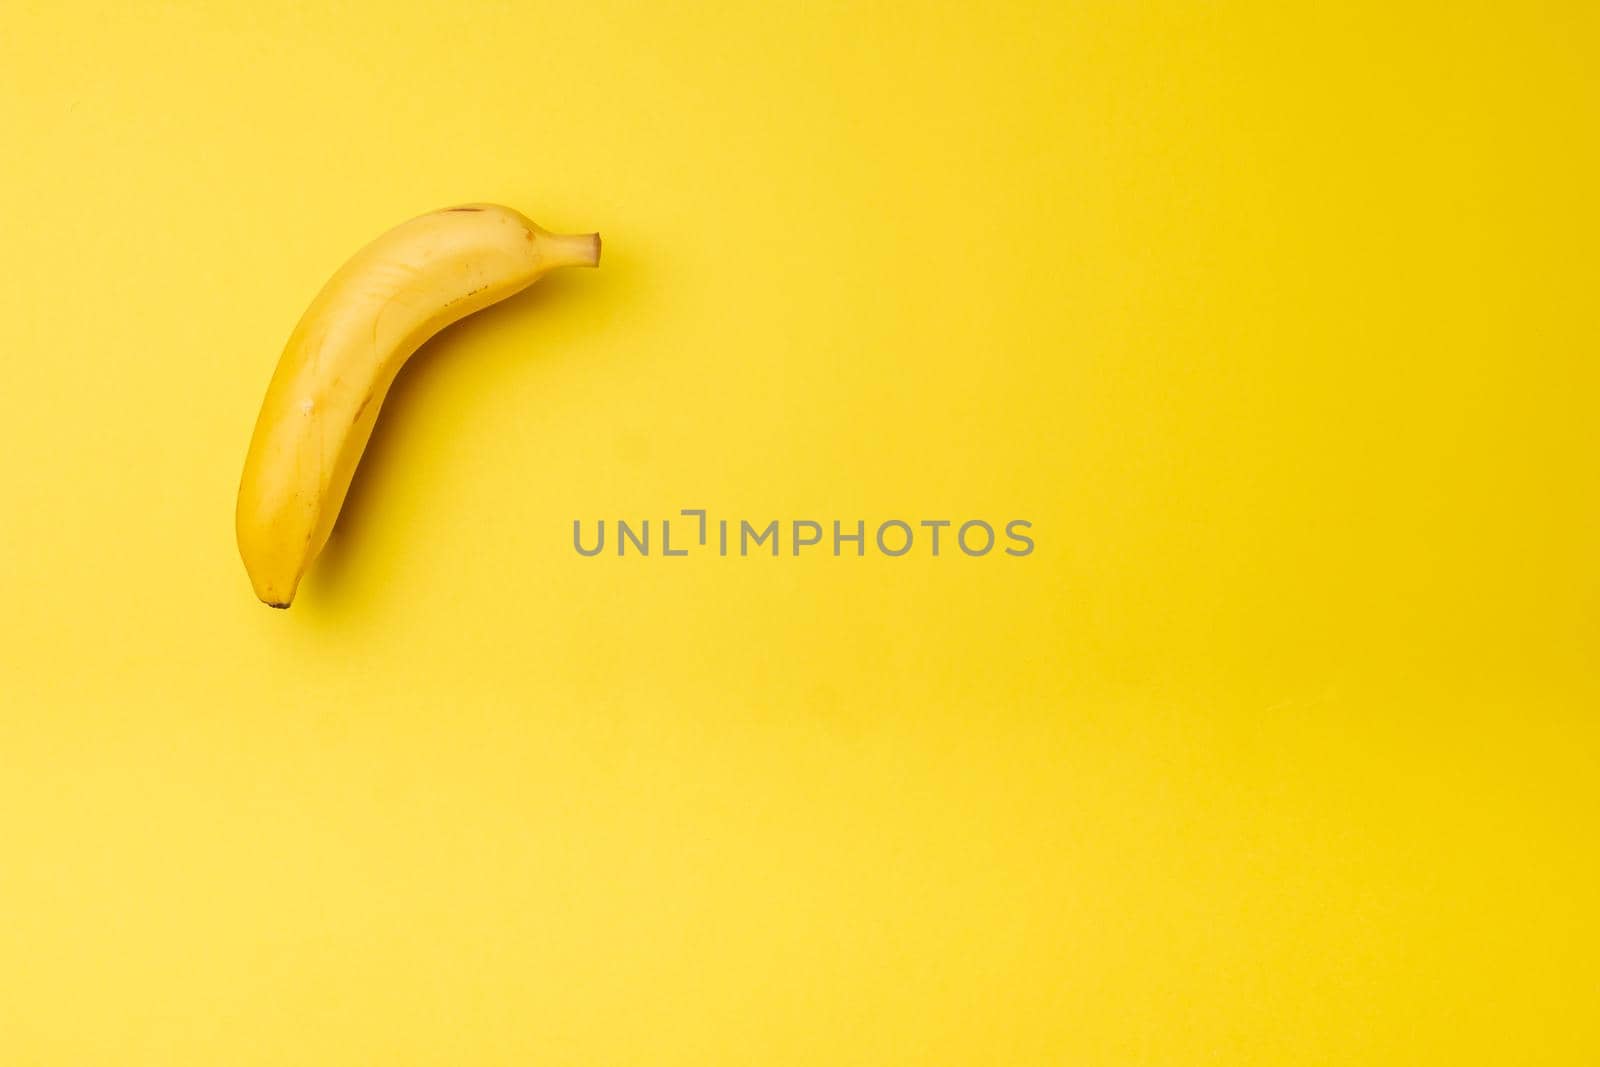 a ripe banana on a yellow background in the upper left corner with soft light from the side